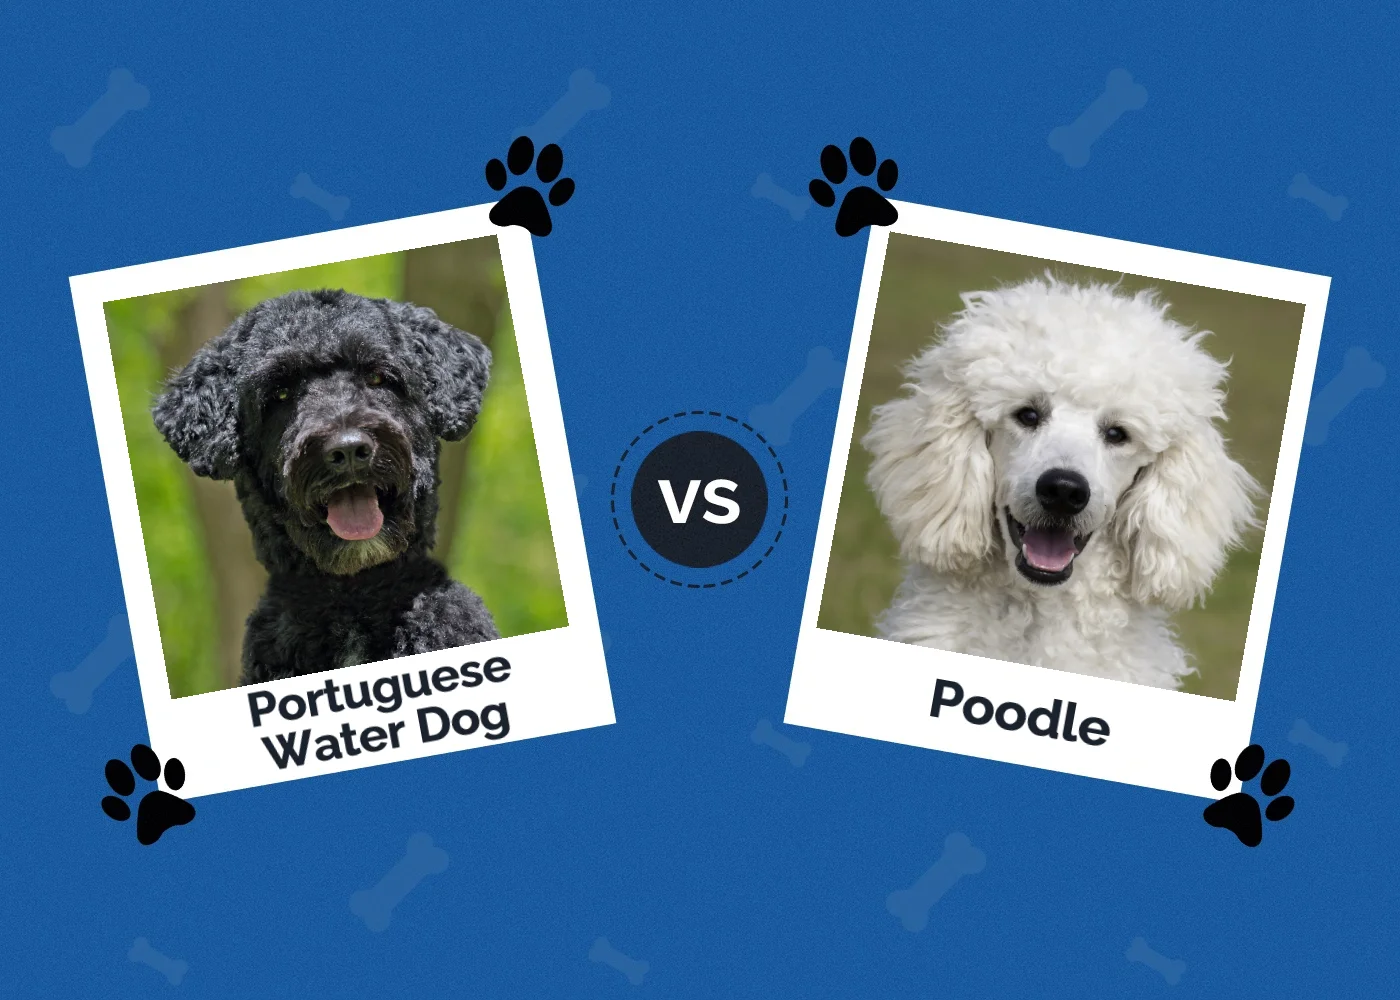 Portuguese Water Dog vs Poodle - Featured Image